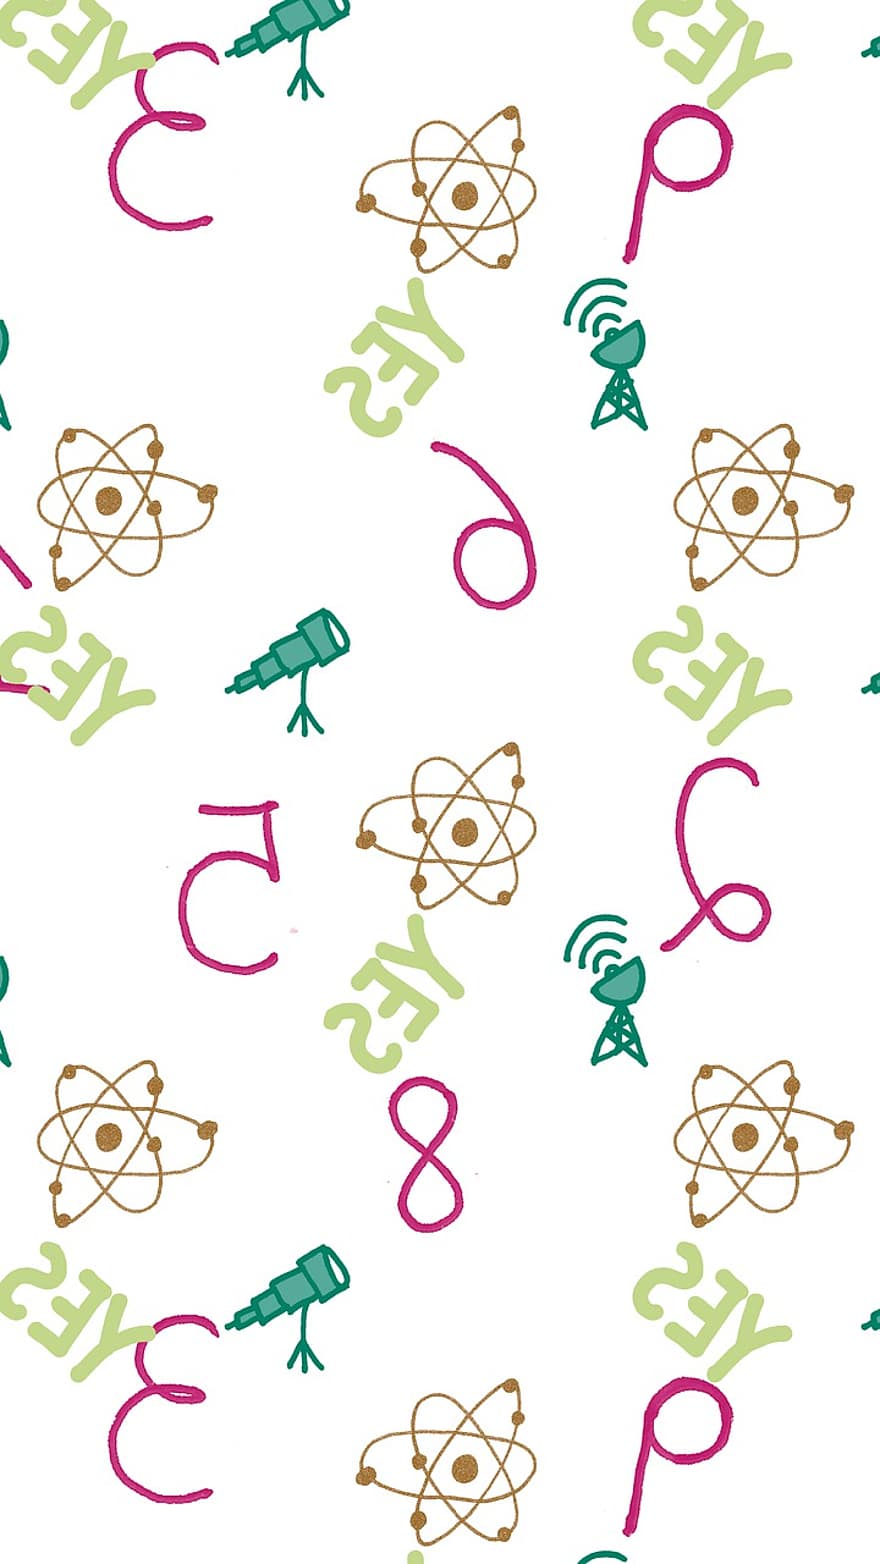 Information, Knowledge, Data, Science Doodles, Yes, Atom, Nuclear, Atomic, Electron, Proton, Nucleus